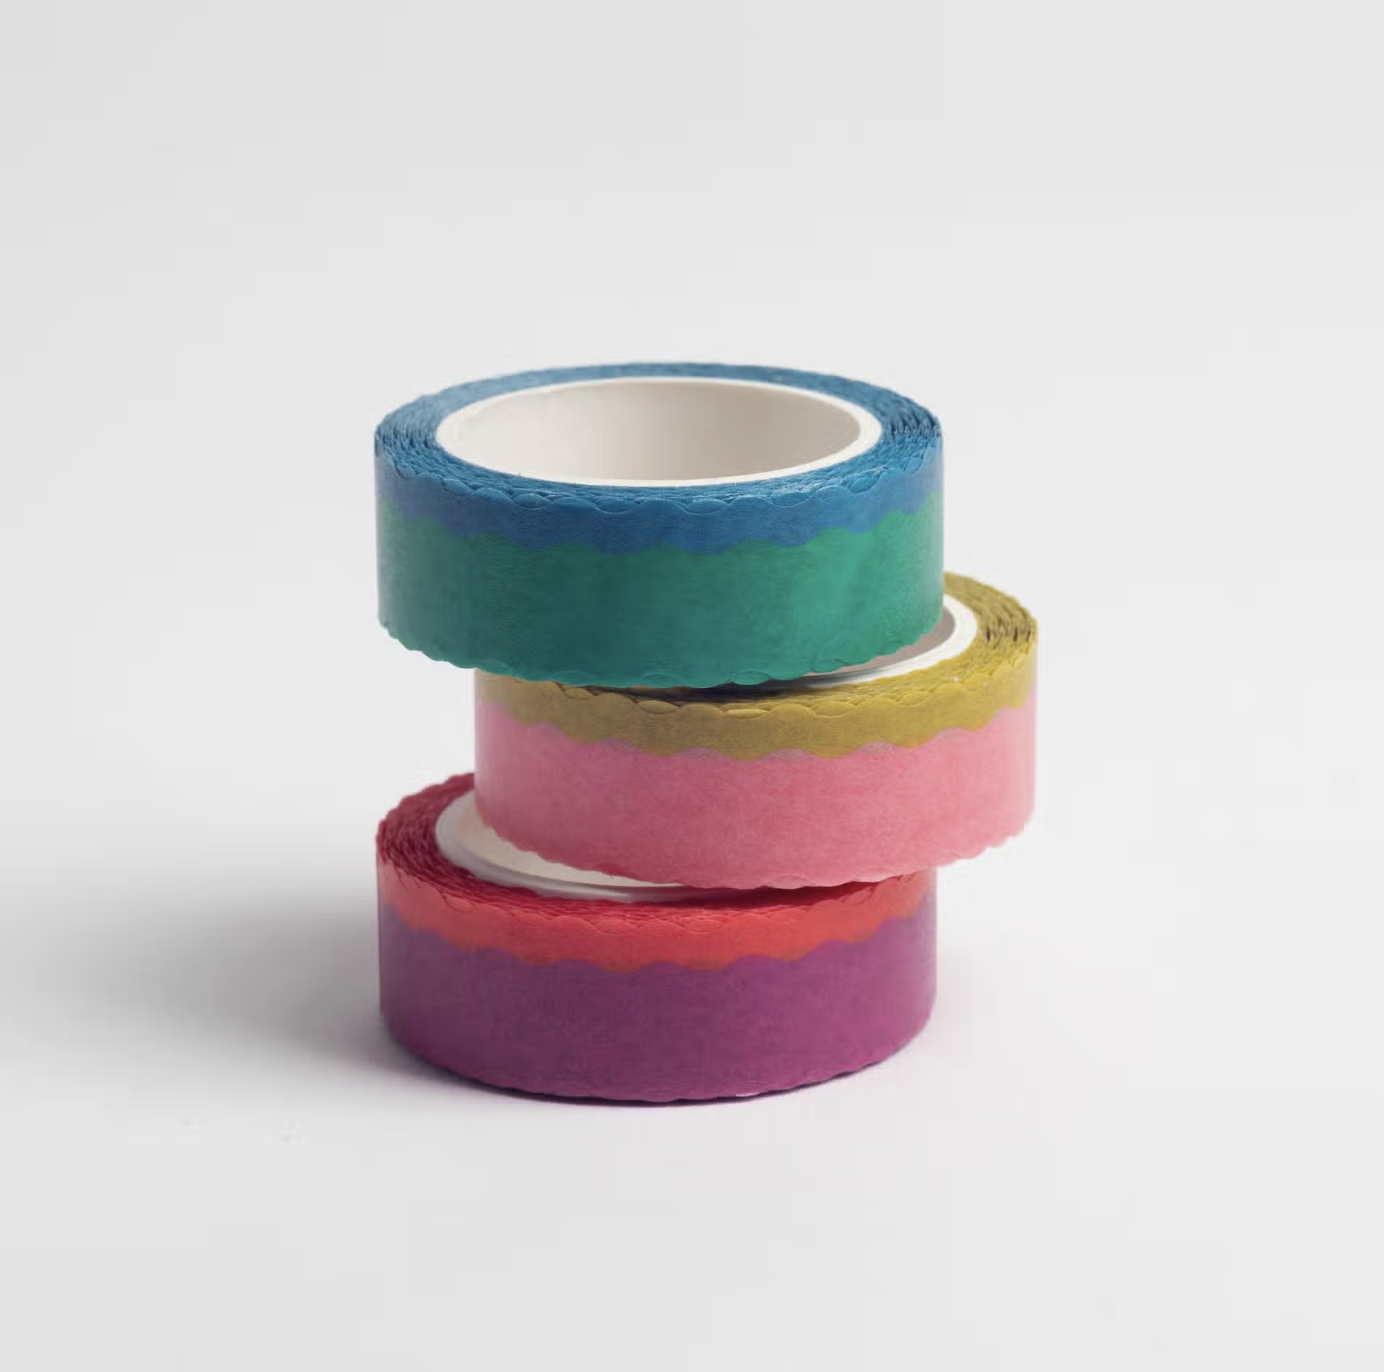 Enhance your crafts with our Die Cut Wavy Washi Tape Set, featuring a variety of wavy-edged washi tapes in assorted colors. Ideal for adding a dynamic and unique touch to your projects. This tape from Sunny Beast is sold at BBB Supplies Craft Shop.